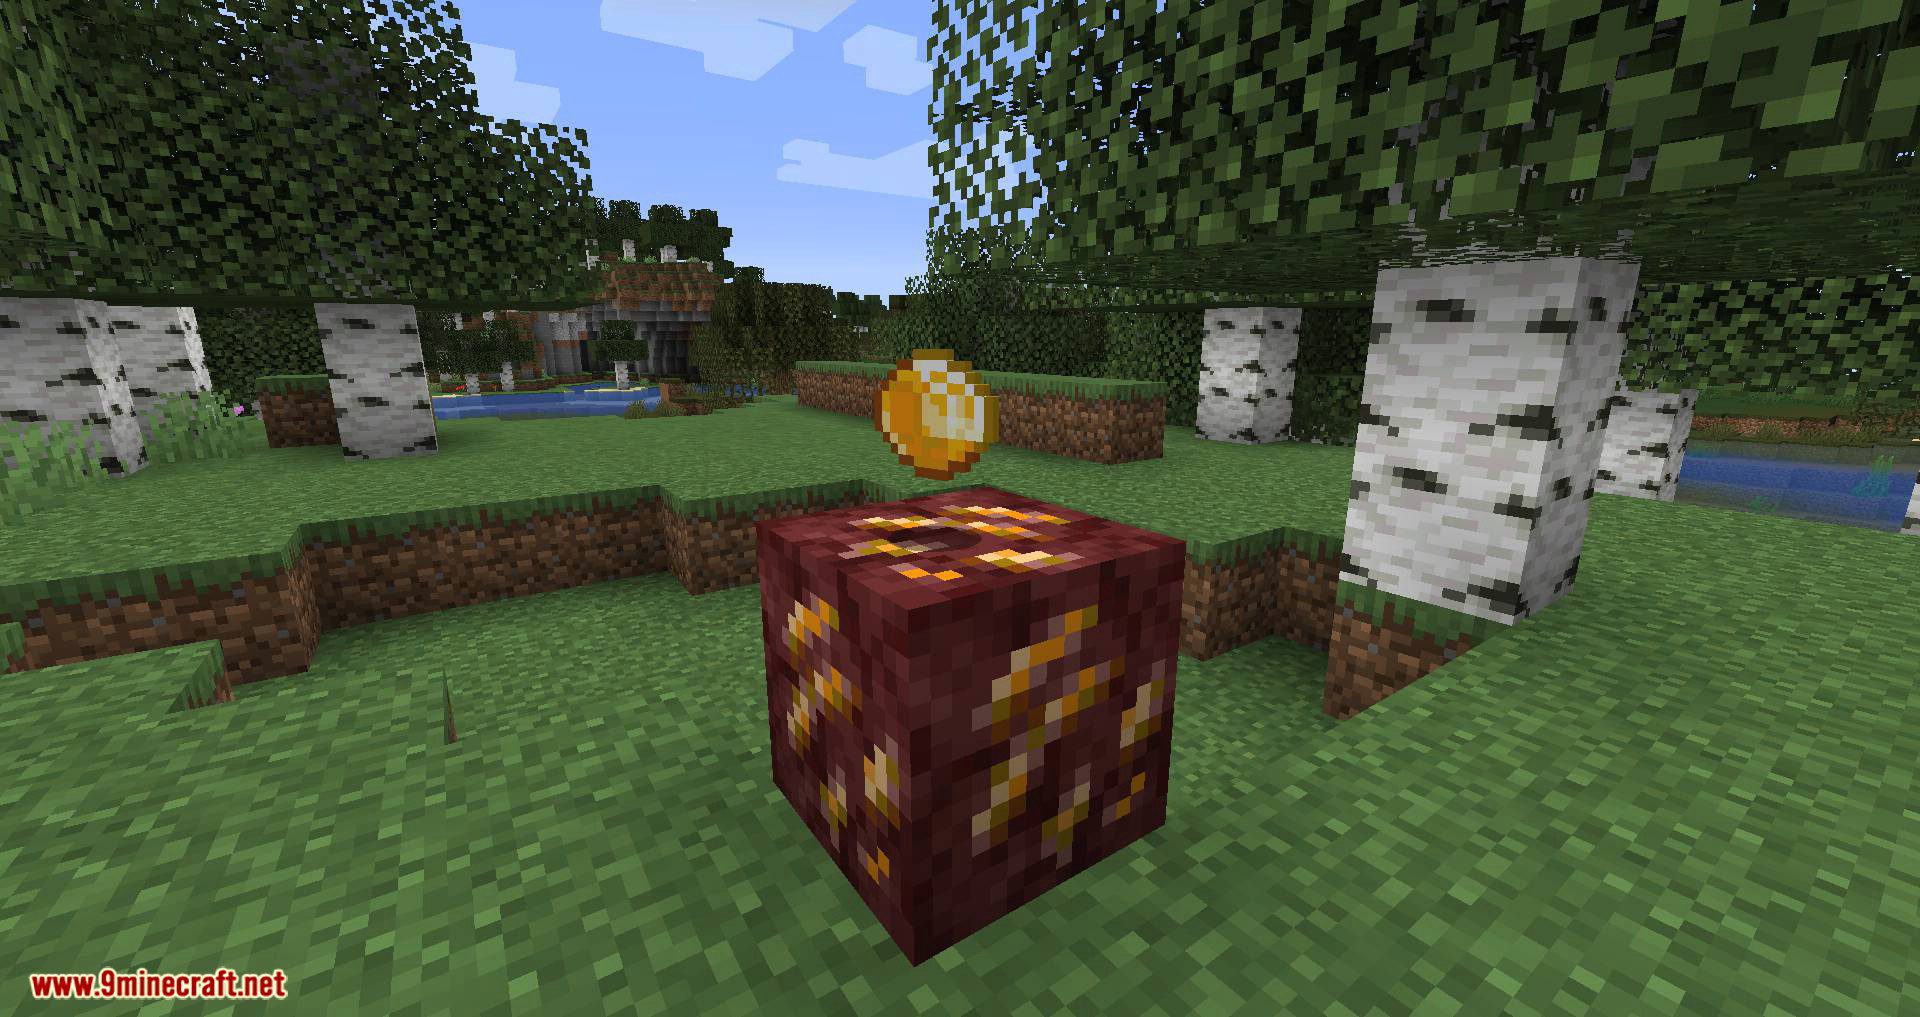 More Ores In ONE Mod (1.19.2, 1.18.2) - Ores in the Overworld, Nether, and End 10